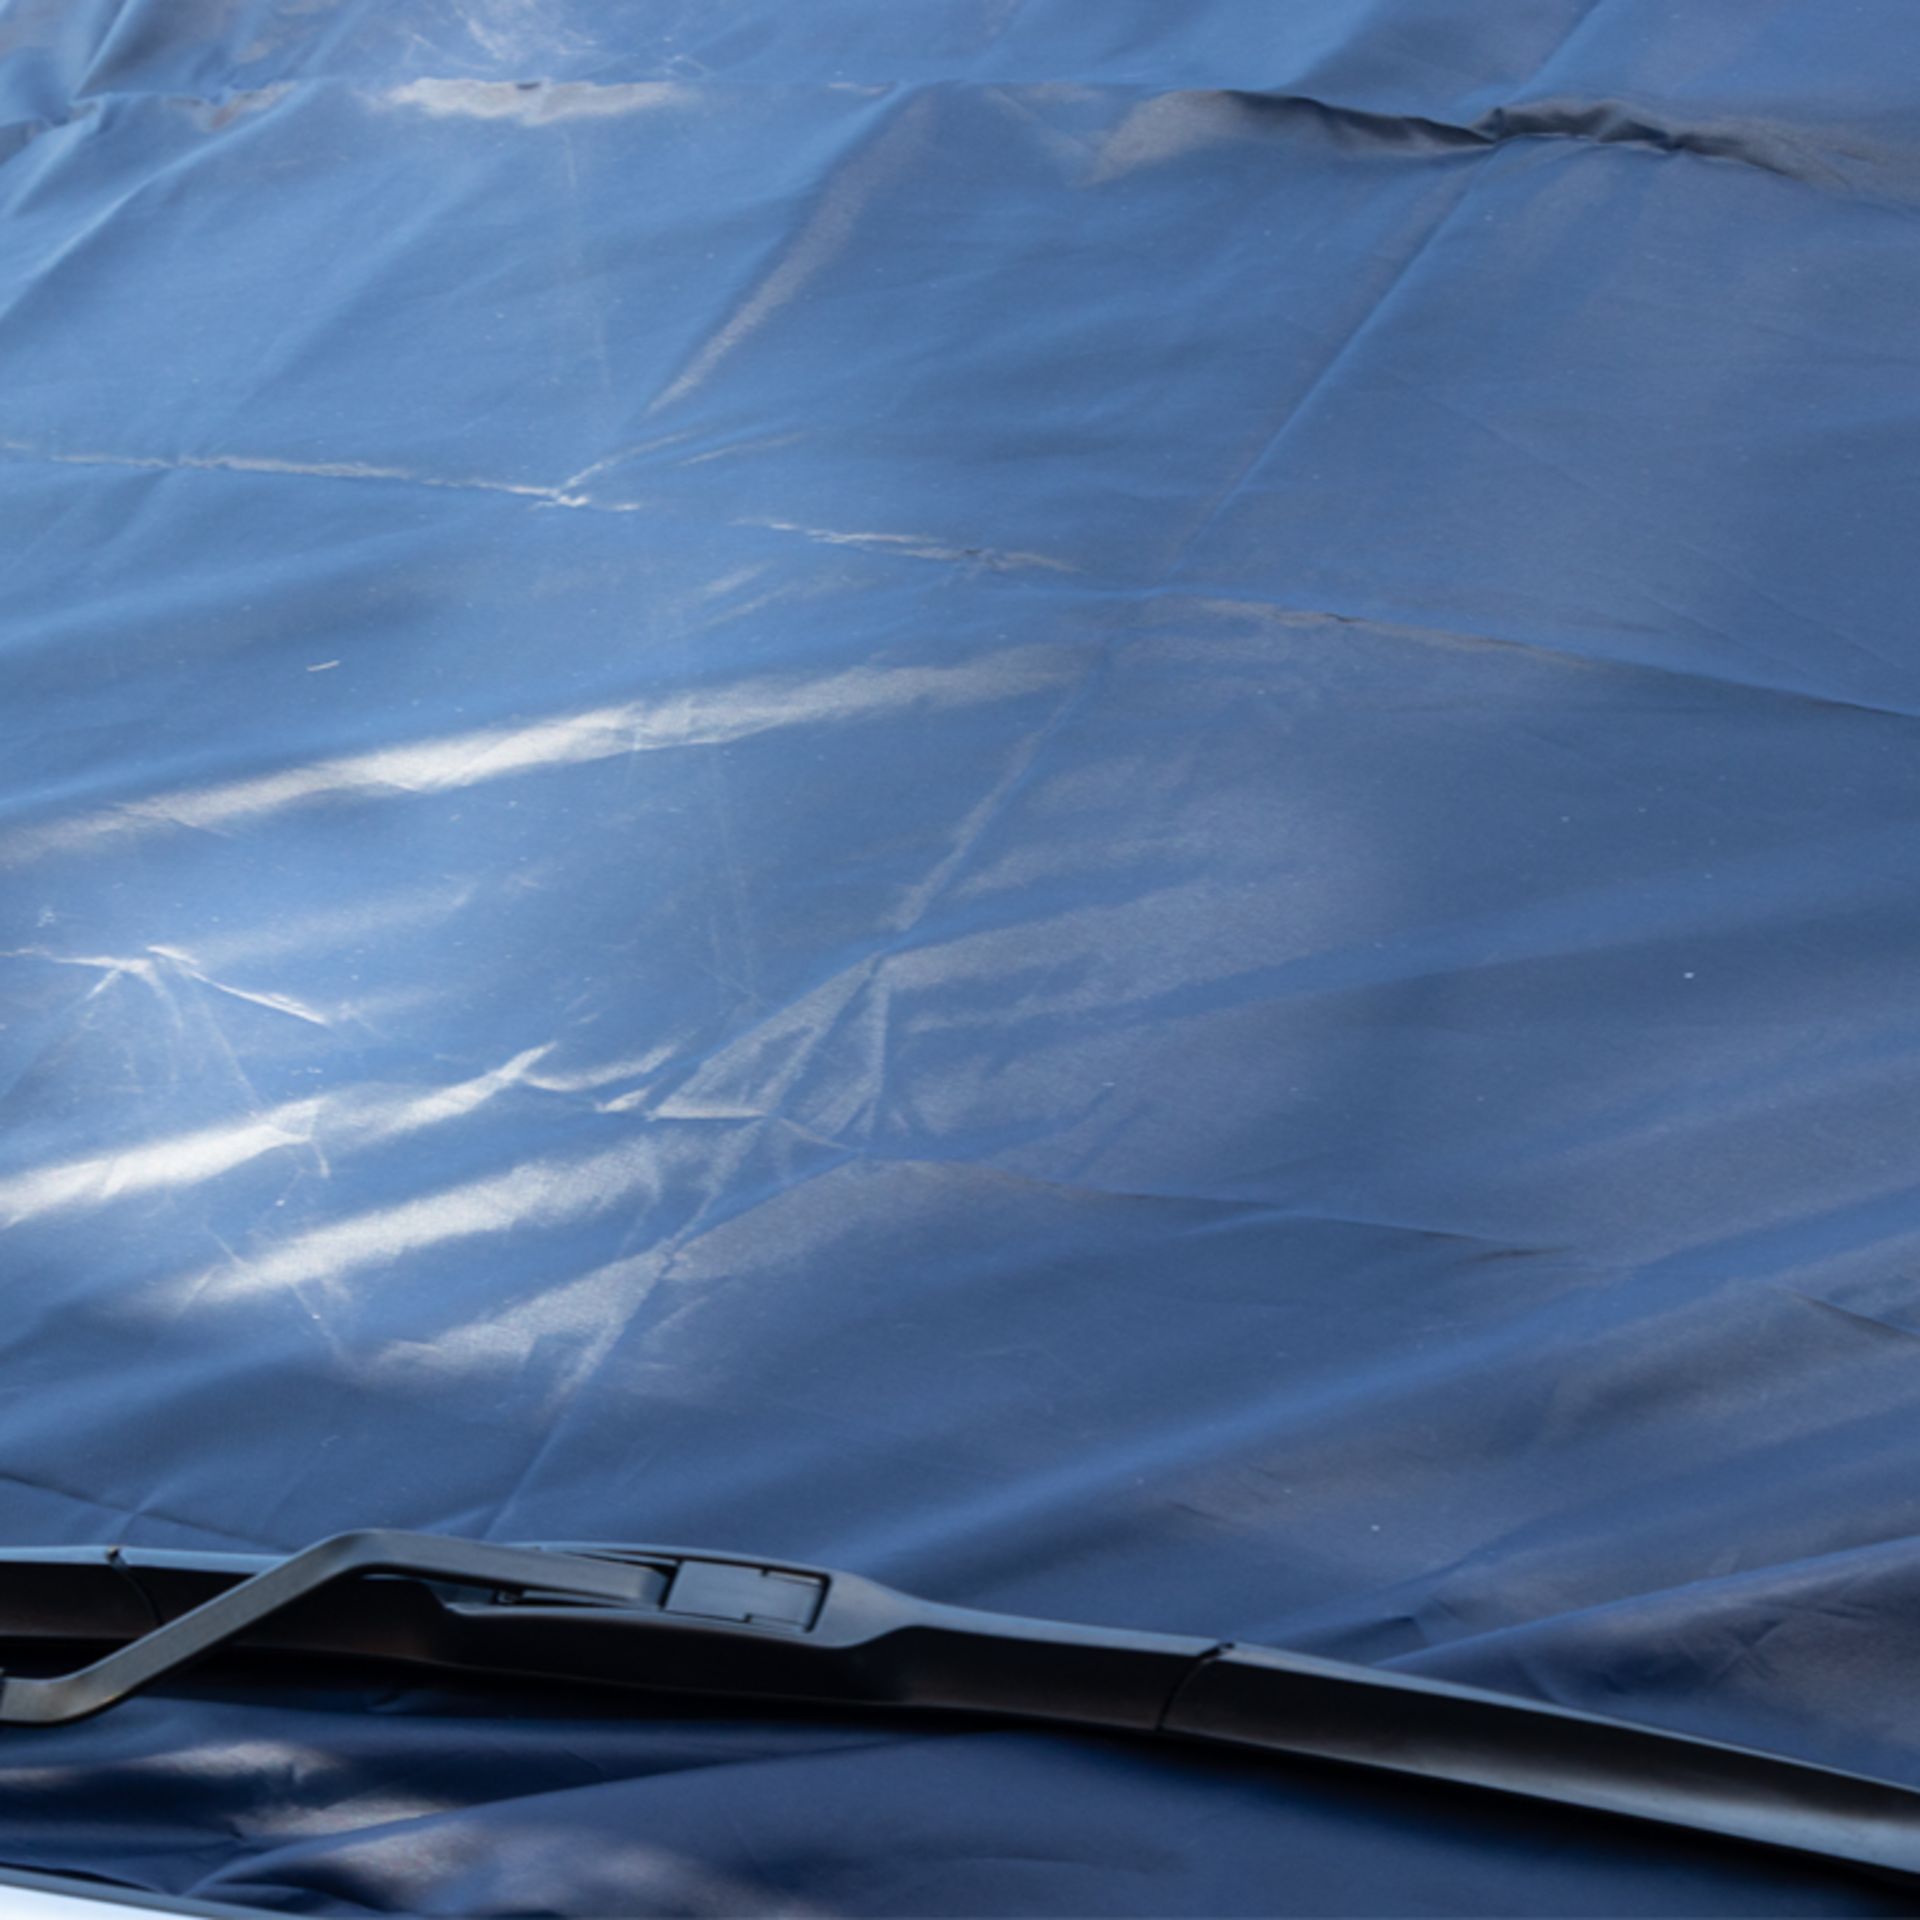 Maypole Car Windscreen Cover - Protects against frost, ice and snow